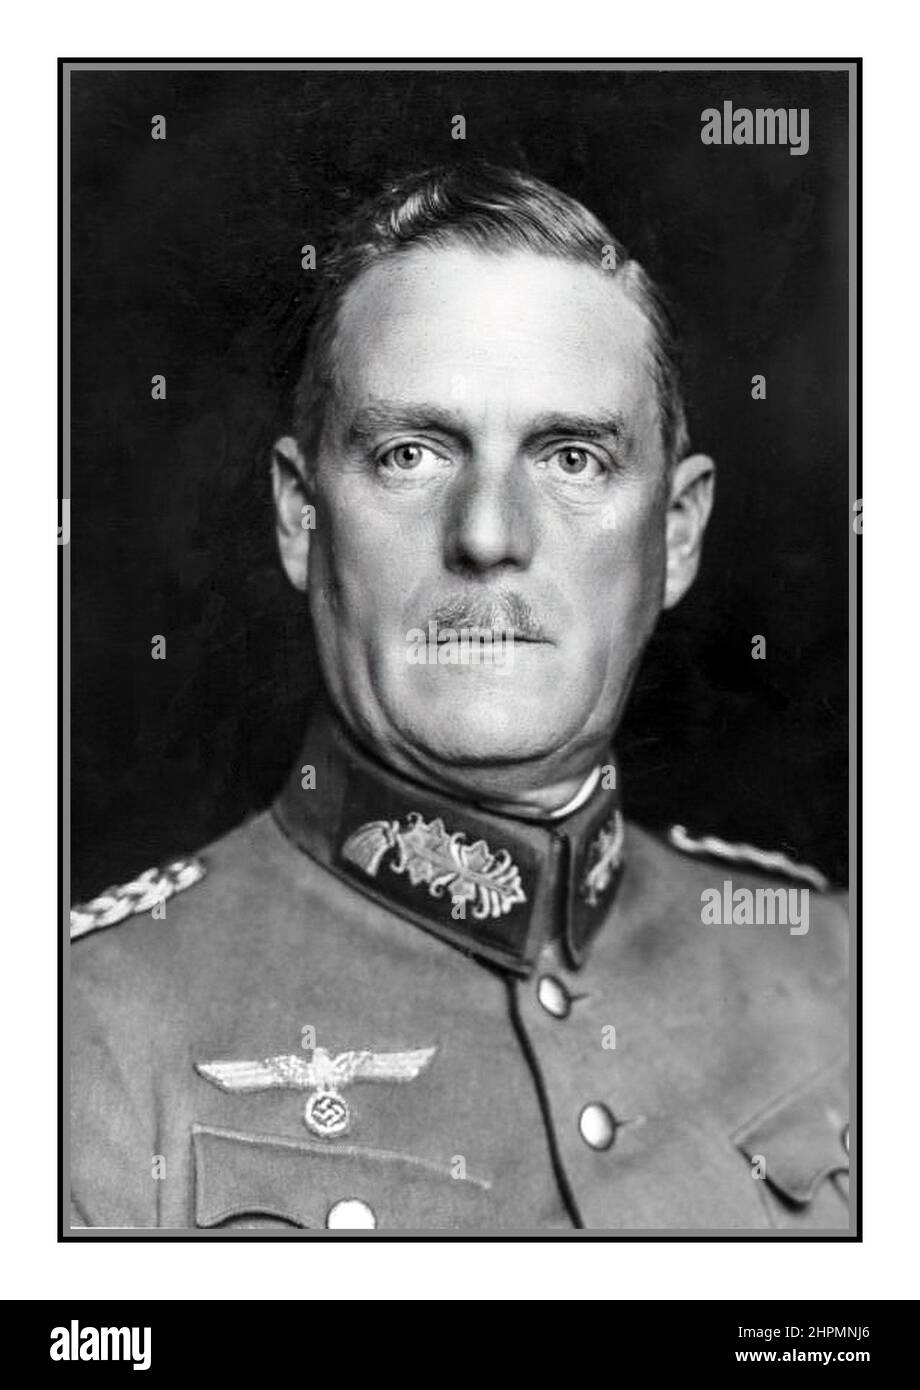 KEITEL 1930s Leading Nazi Wilhelm Keitel in the uniform of a Major General, later Field Marshal General, 1938 to 1945 Chief of the High Command of the Wehrmacht.Confidant and close circle of Adolf Hitler  Executed for war crimes at Nuremberg Germany Stock Photo